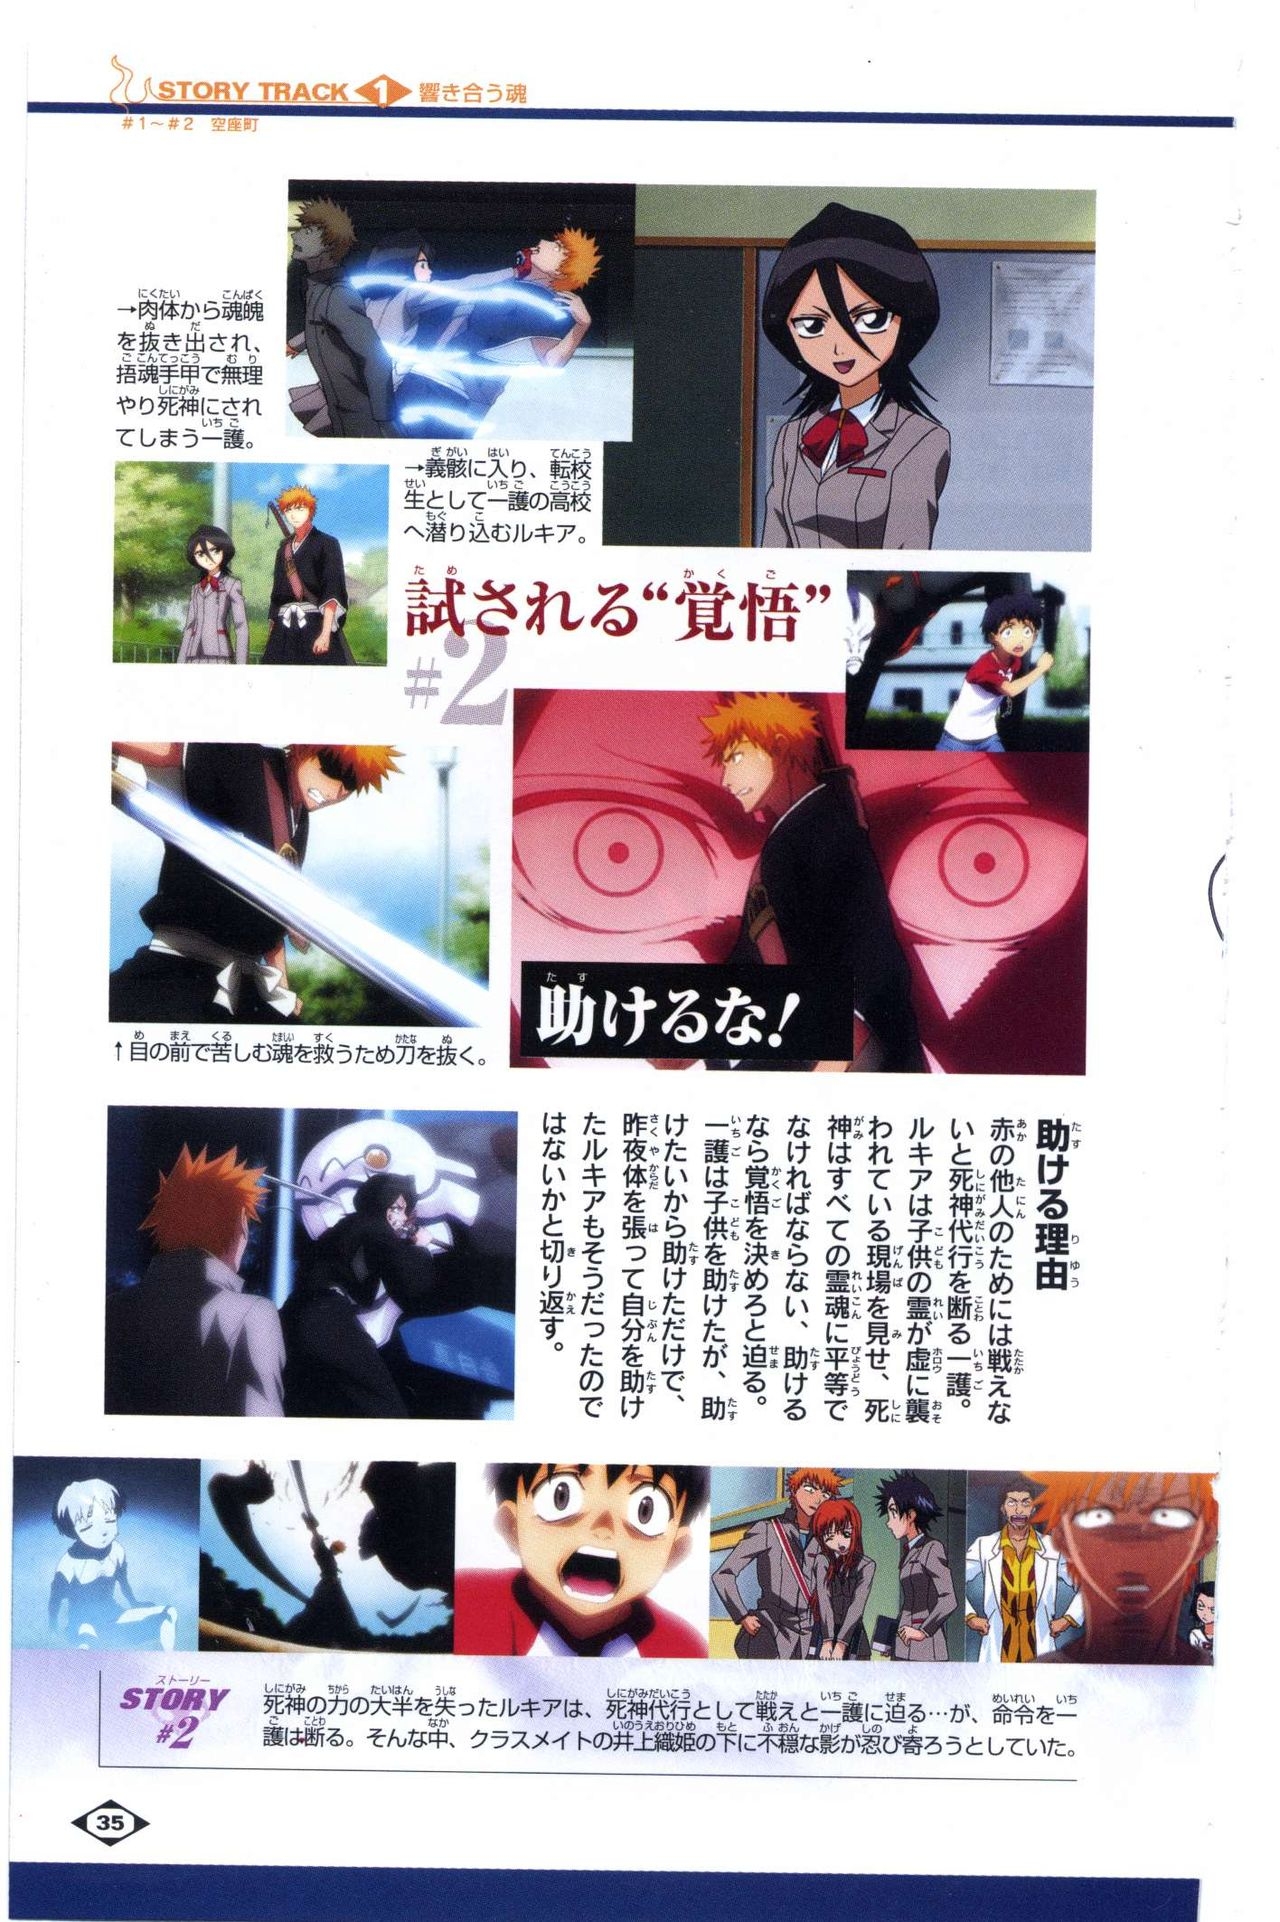 Bleach: Official Animation Book VIBEs 35